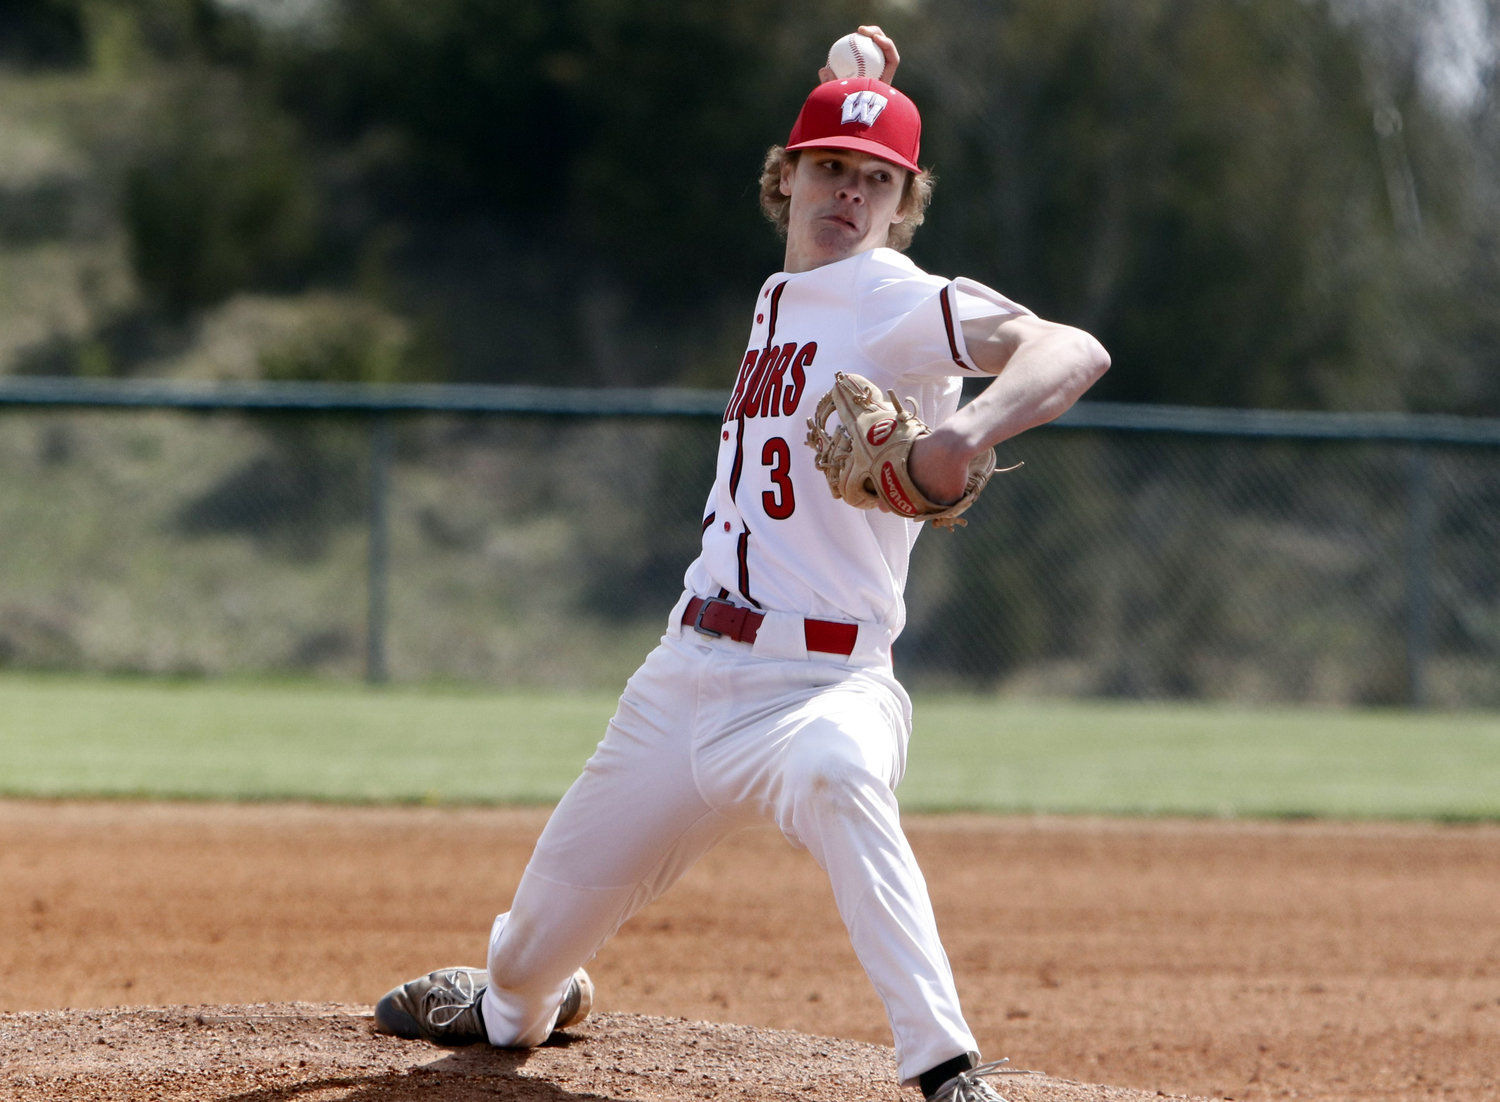 Warrenton’s Ben Peth delivers a pitch to home plate during the first inning of Warrenton’s win over Winfield.